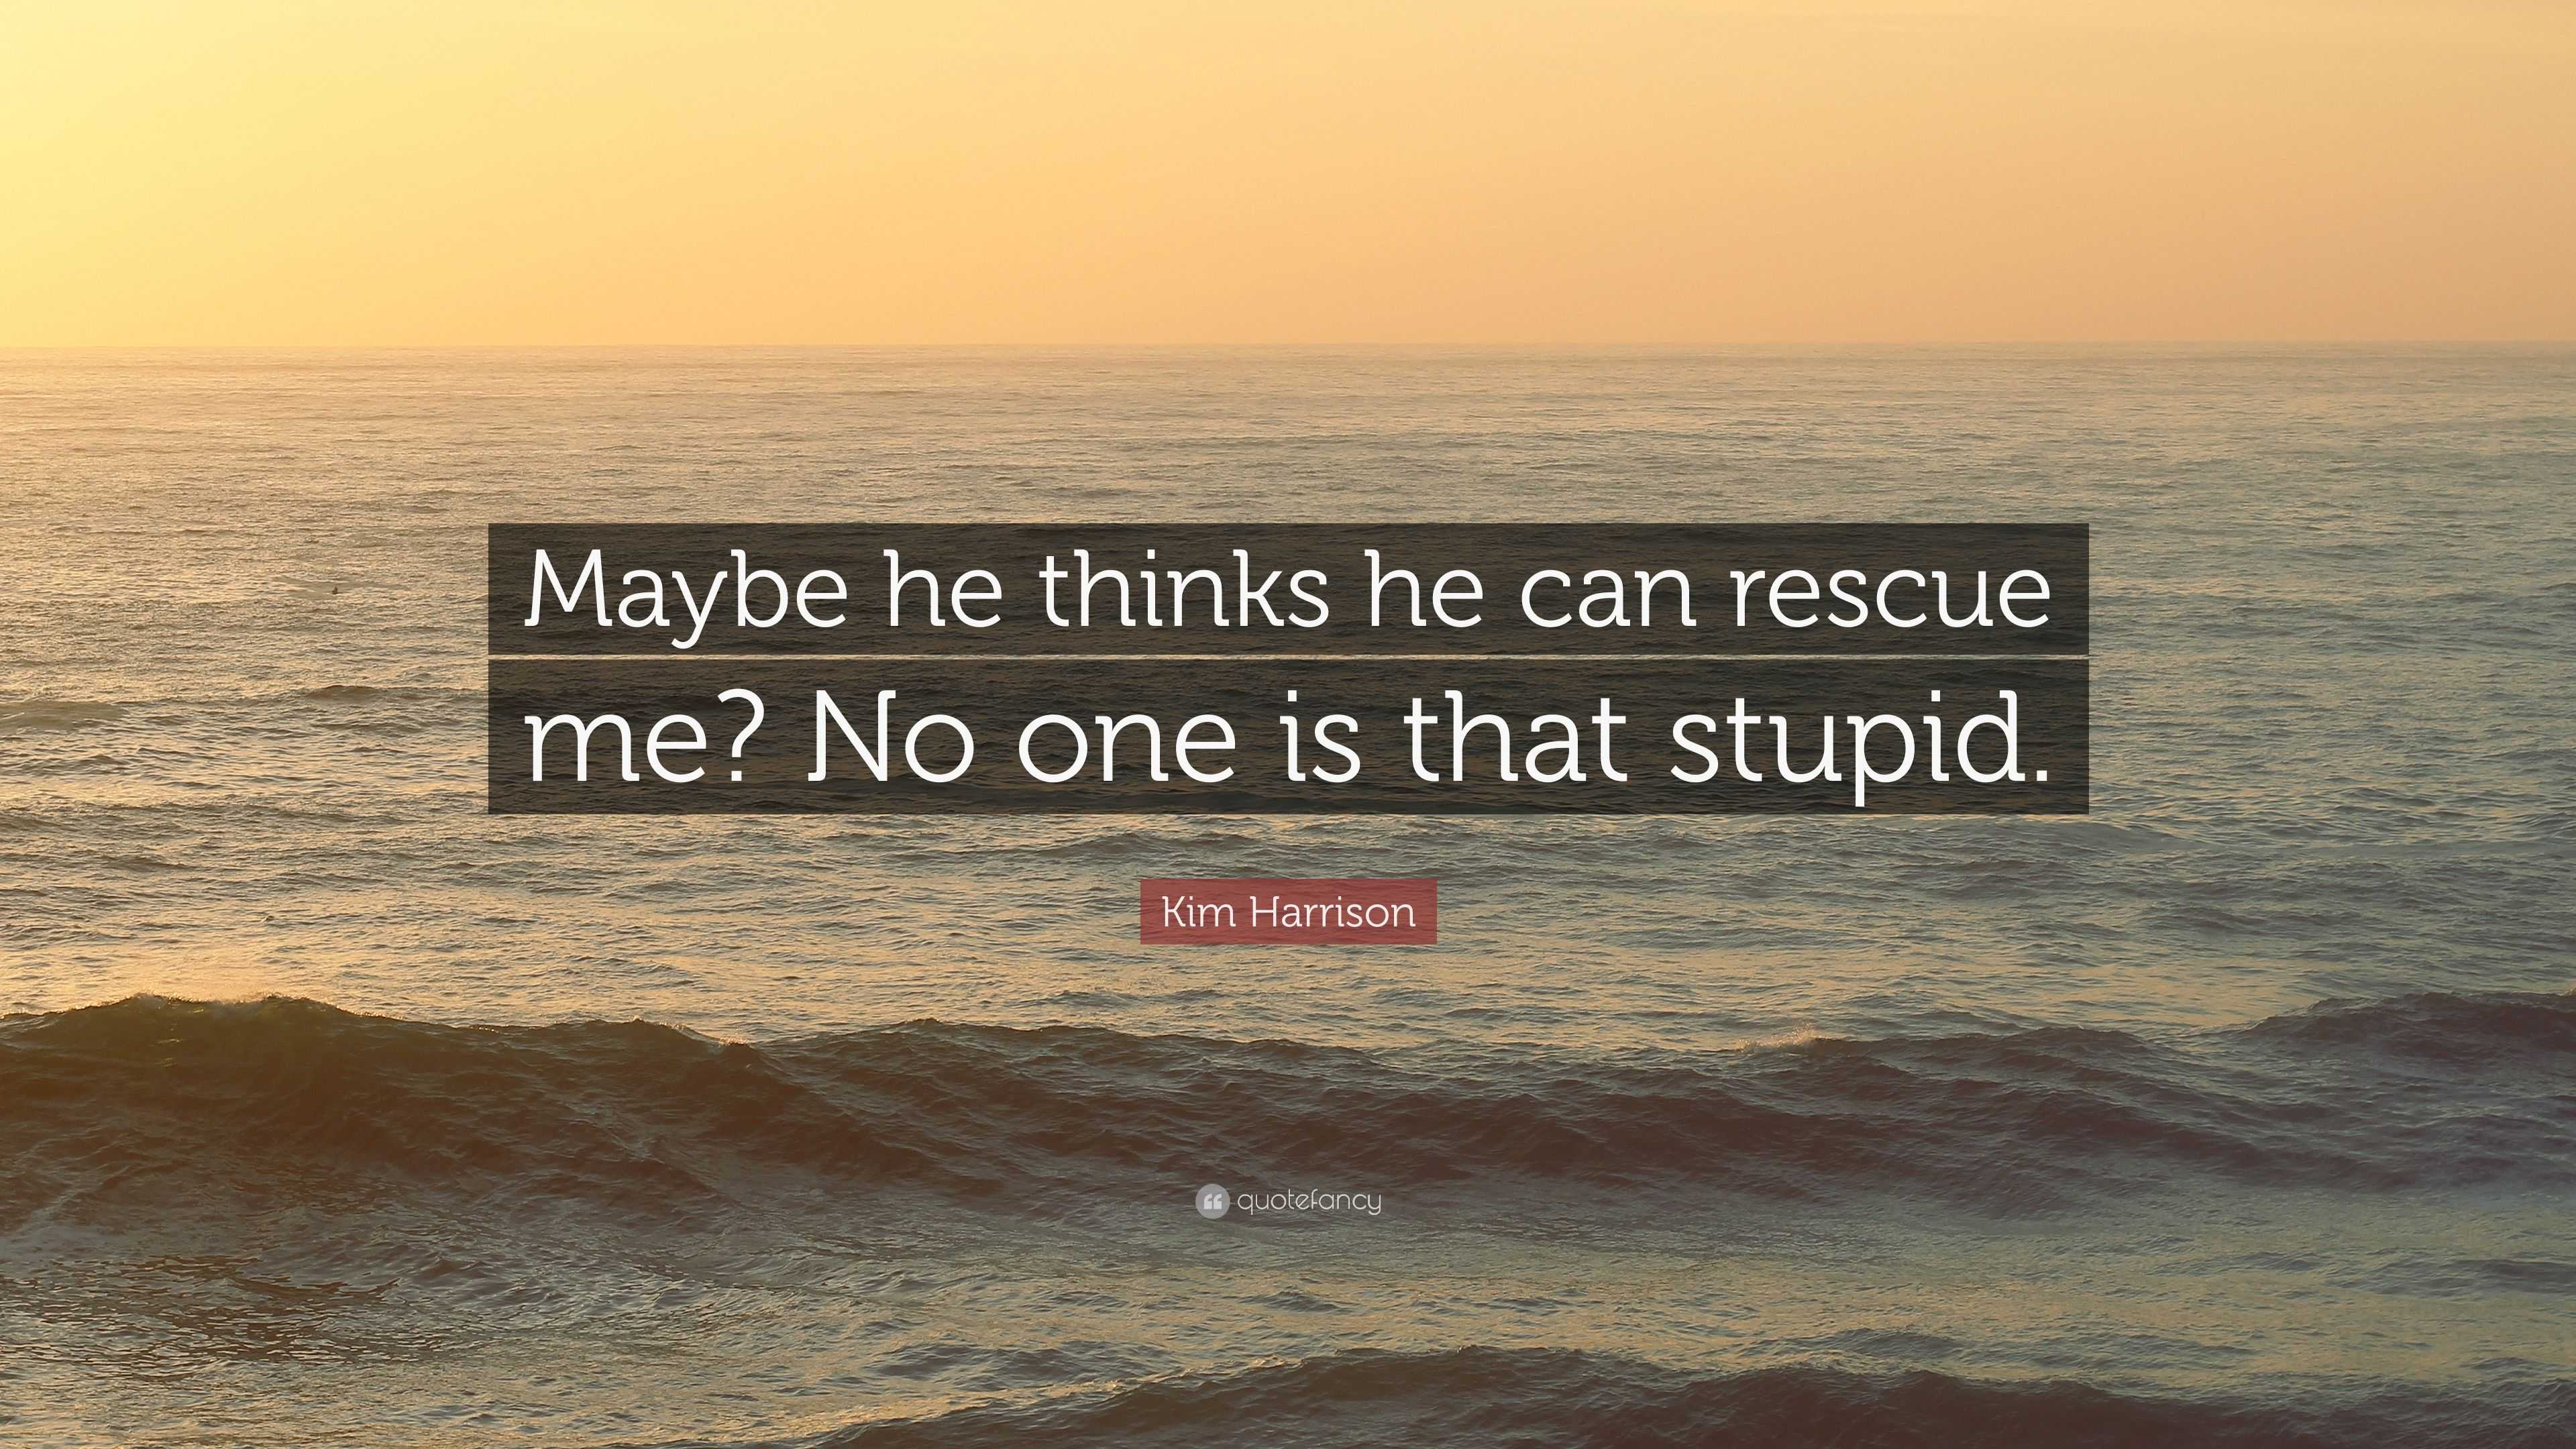 Kim Harrison Quote: "Maybe he thinks he can rescue me? No one is that stupid." (7 wallpapers ...